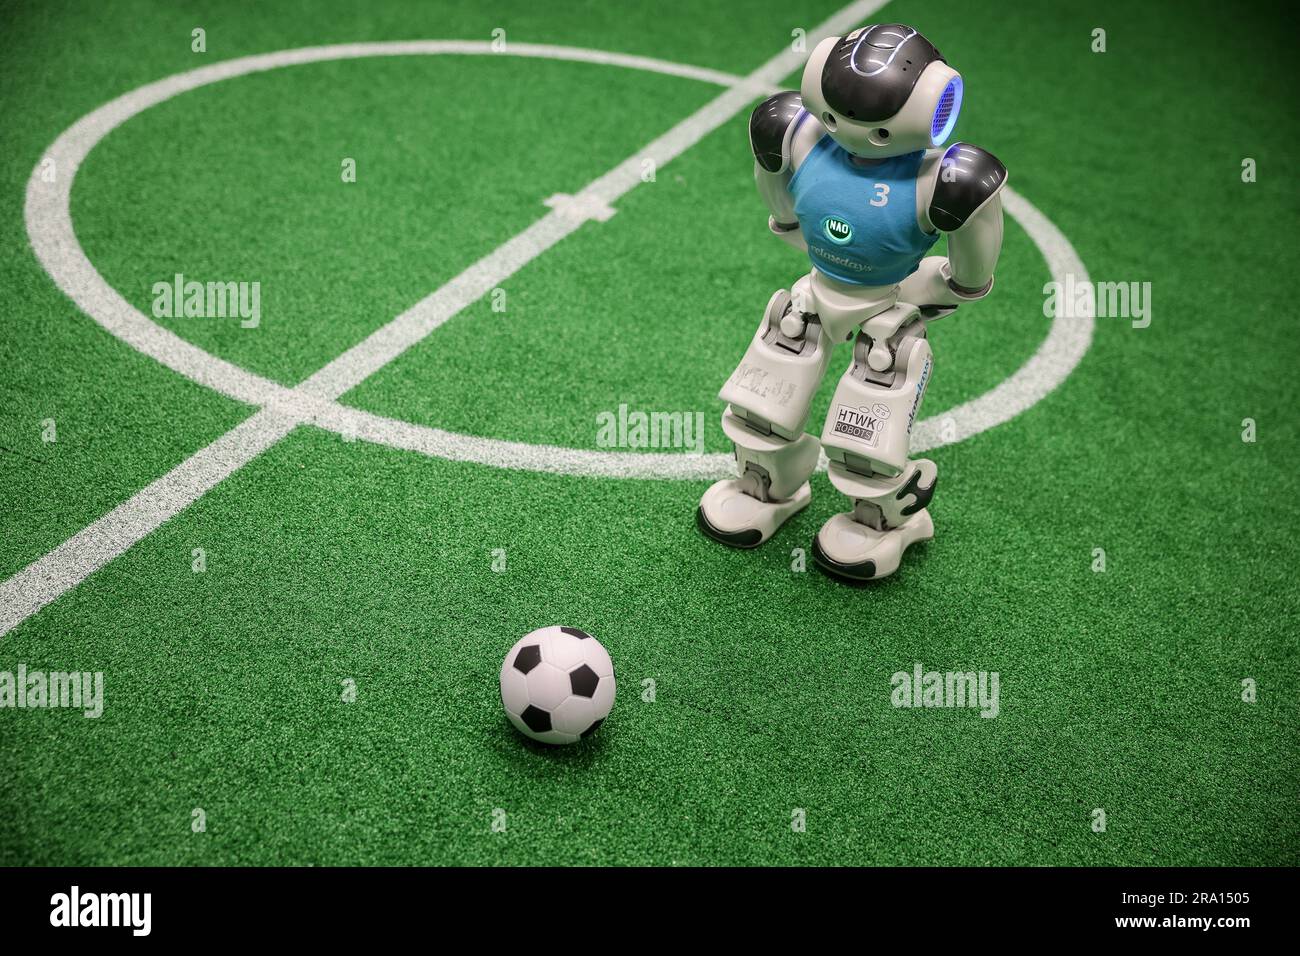 Leipzig, Germany. 28th June, 2023. A Nao robot plays soccer during a training game in a laboratory at the Leipzig University of Applied Sciences (HTWK). Having already become world champions in robot soccer in 2018, the Leipzig team is aiming to secure the title again this year. Starting July 5, robots playing soccer will face off in a World Cup in Bordeaux, France. Credit: Jan Woitas/dpa/Alamy Live News Stock Photo